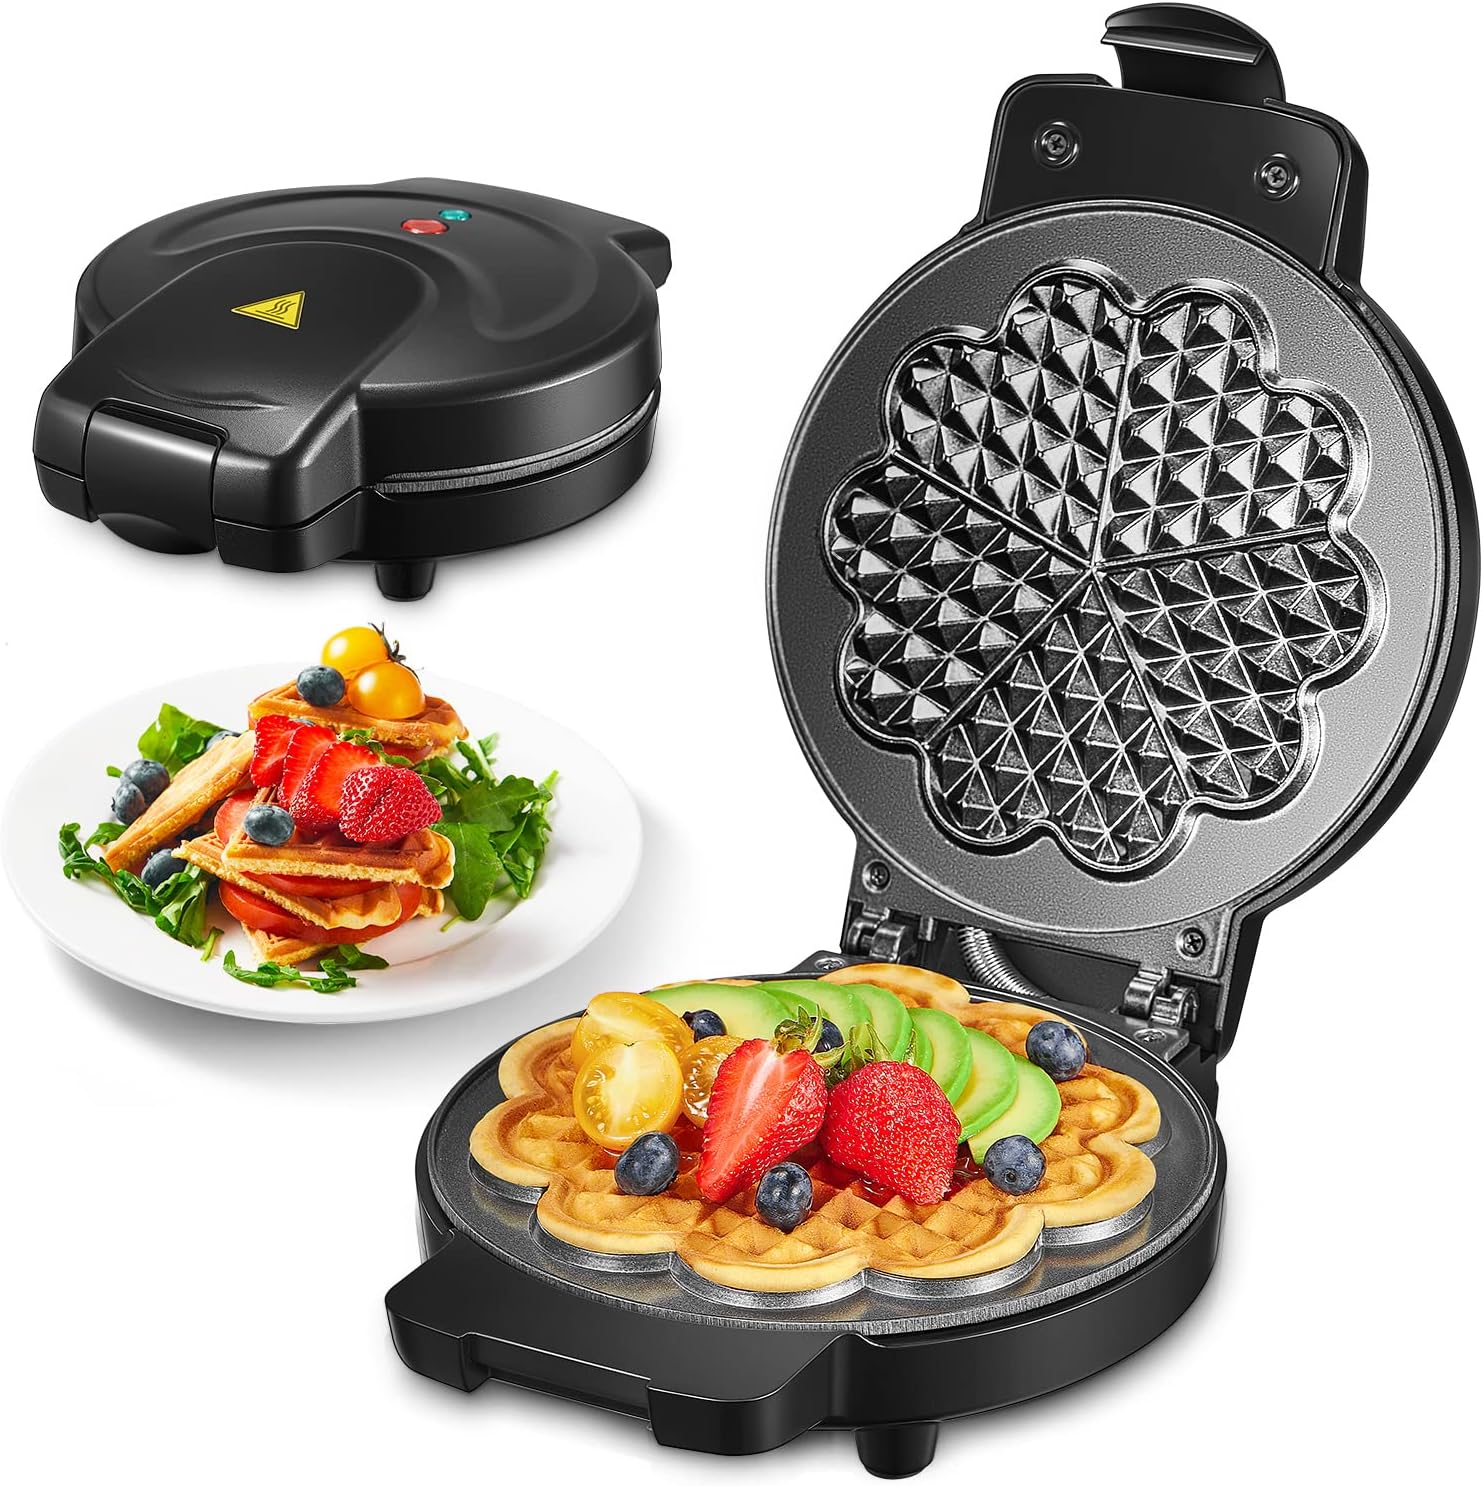 FOHERE WAFFLE INON, HEART SHAPE, 900 W, Waffle Maker with Non-Stick Coating, Waffle Size 16.3 cm, Optical Ready-to-Message, Classic Heart Waffle Iron for Family Parties and Christmas